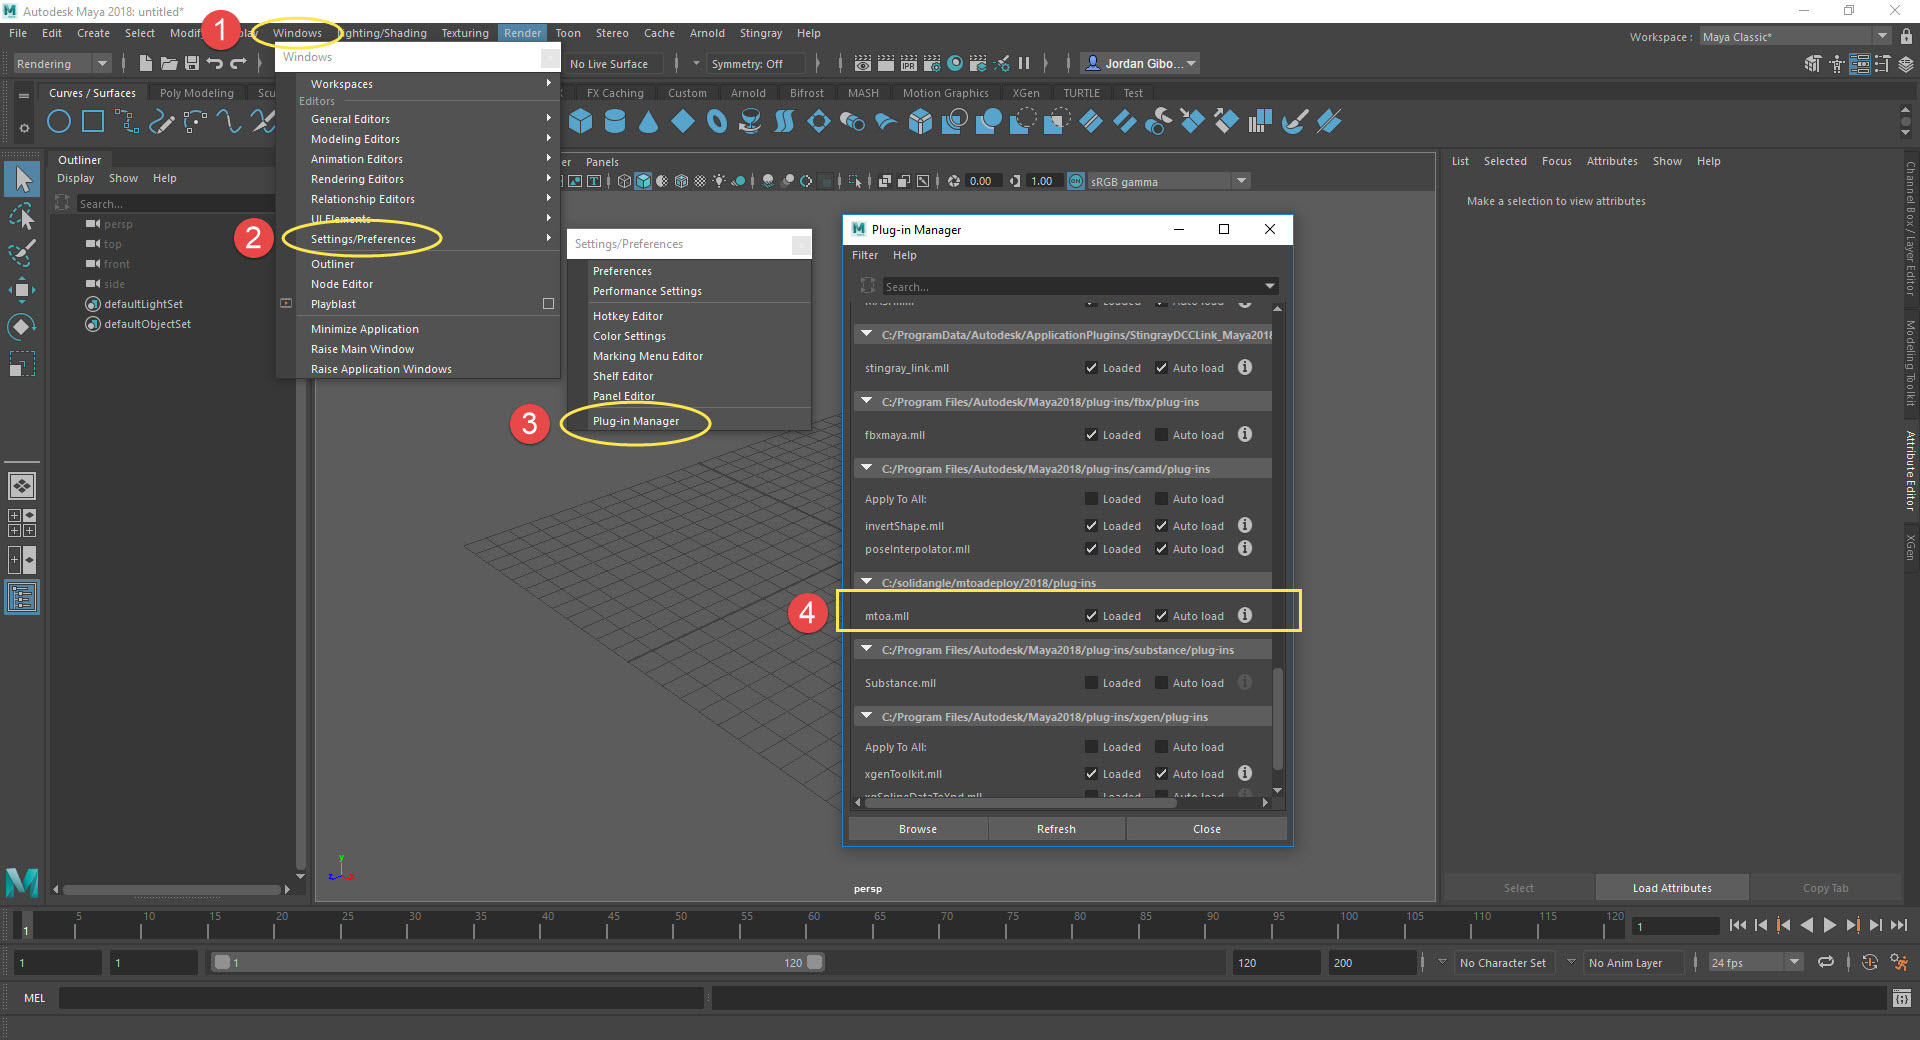 Arnold not showing as a Render Option in Maya 2018